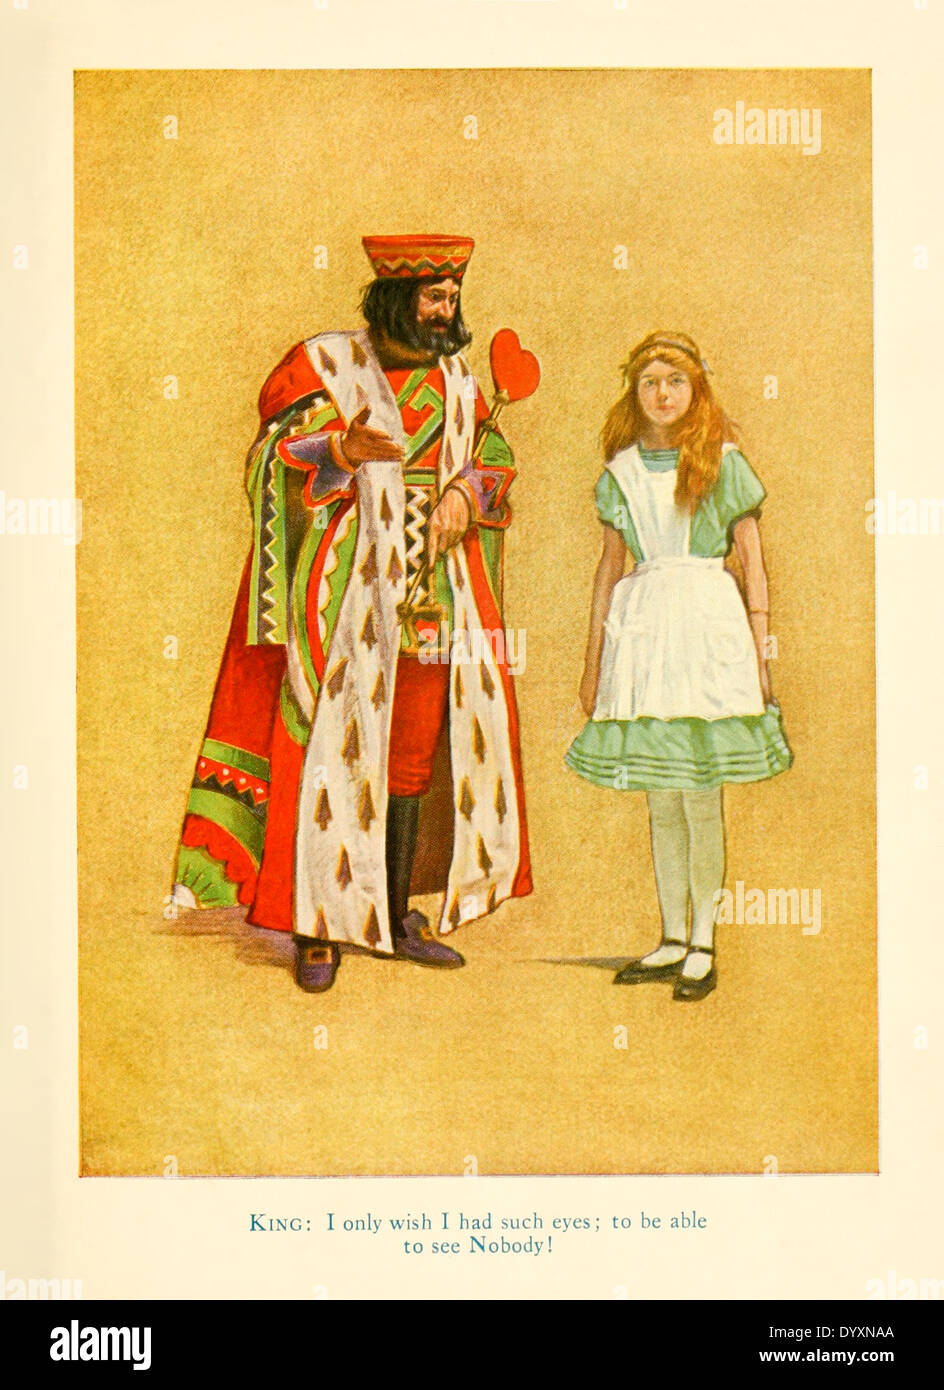 Alice and King of Hearts, from for the 1915 stage adaptation of 'Alice in Wonderland' by Lewis Carroll, illustration by James Allen St. John (1872-1957). See description for more information. Stock Photo